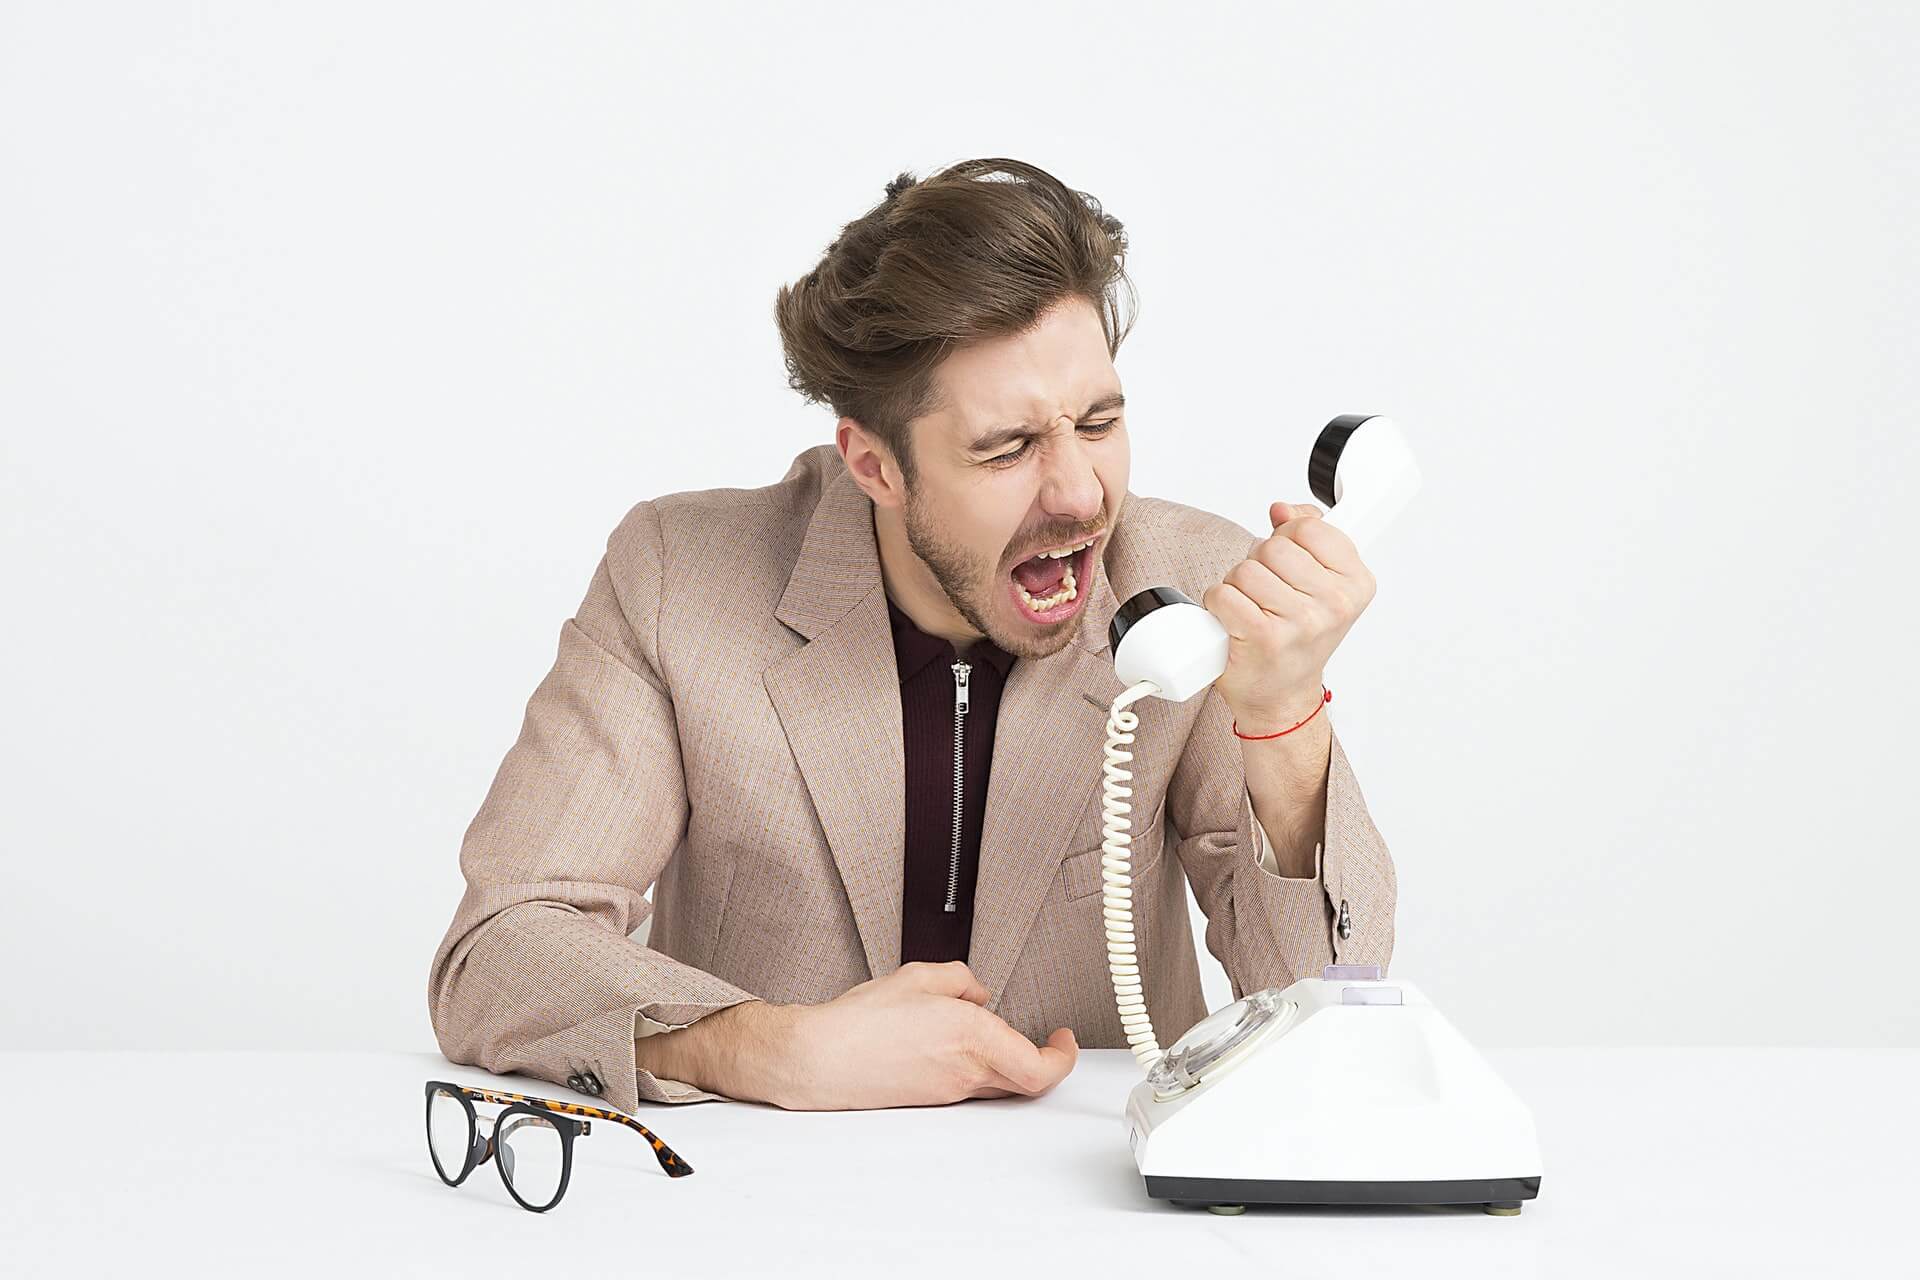 Client support agent screaming angrily at a customer over the phone